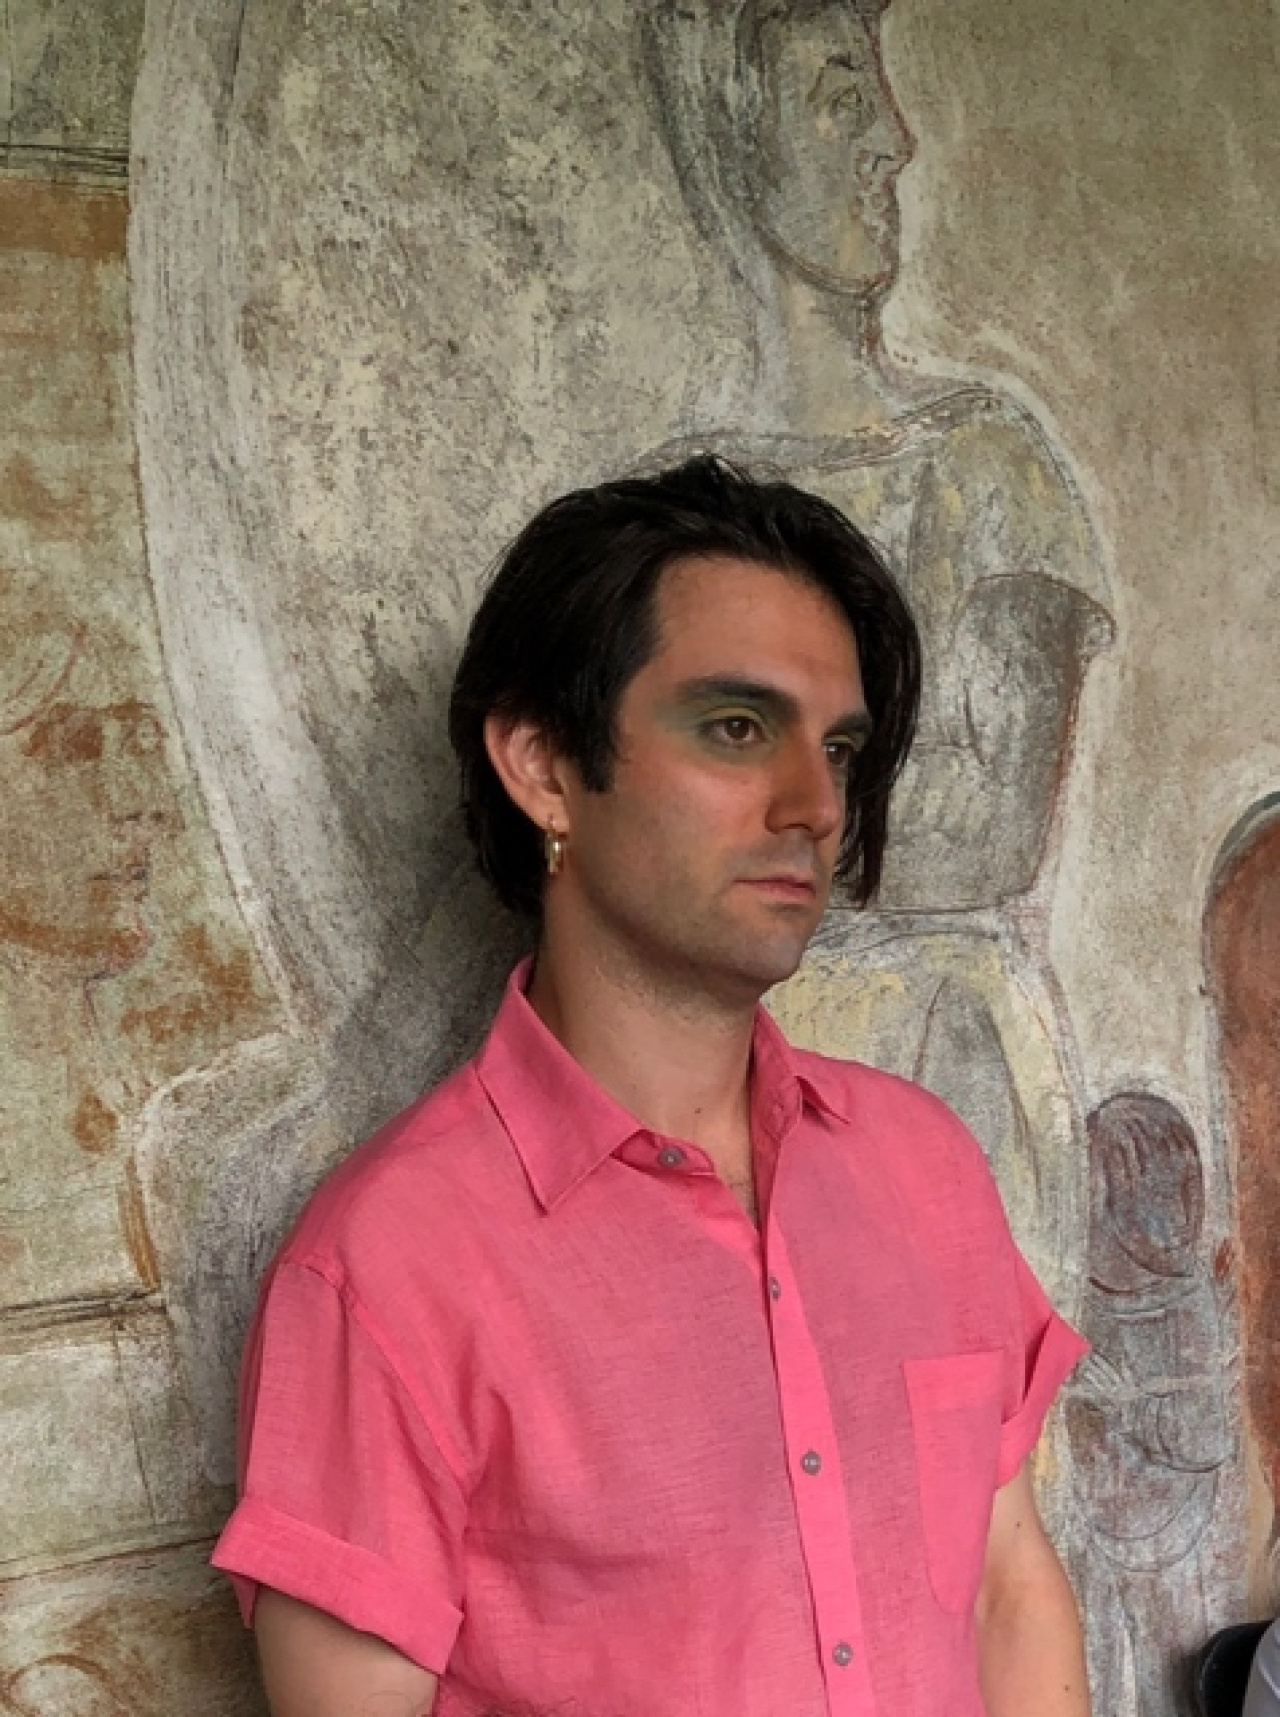 A black-haired man in a pink shirt can be seen leaning against a stone wall and looking out of the picture to the right.